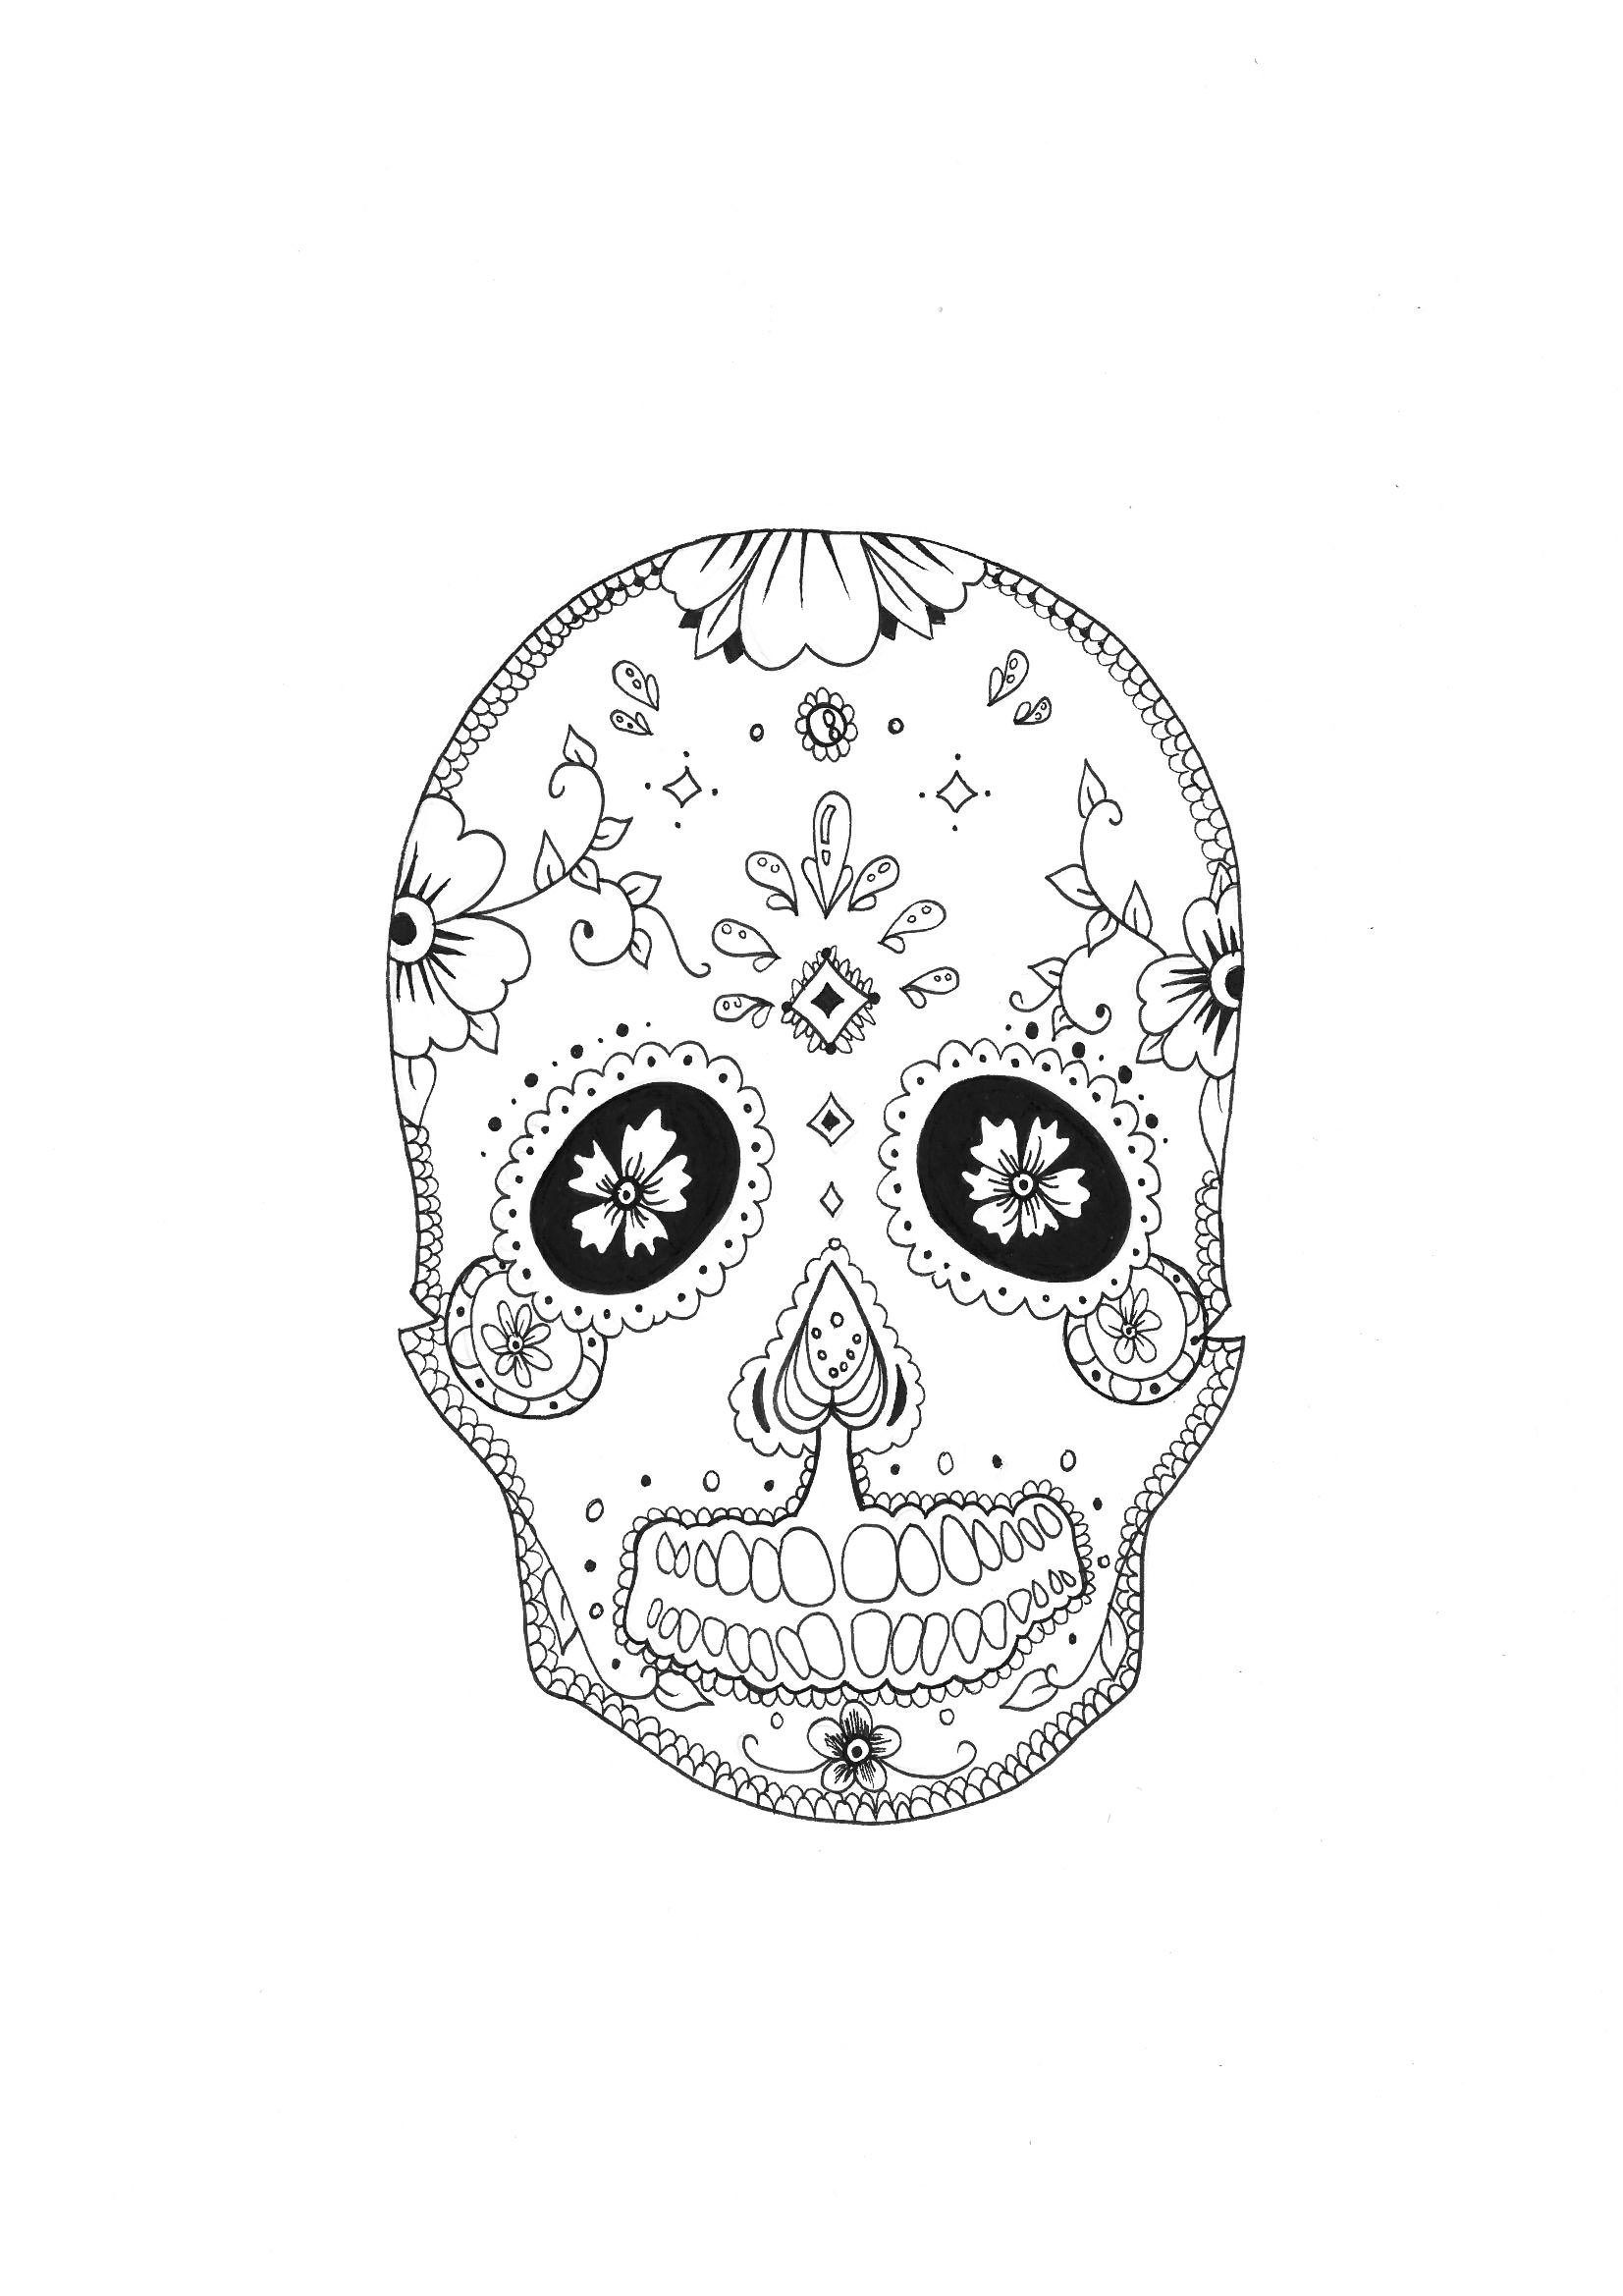 A coloring page of skull with flower patterns very relaxing.